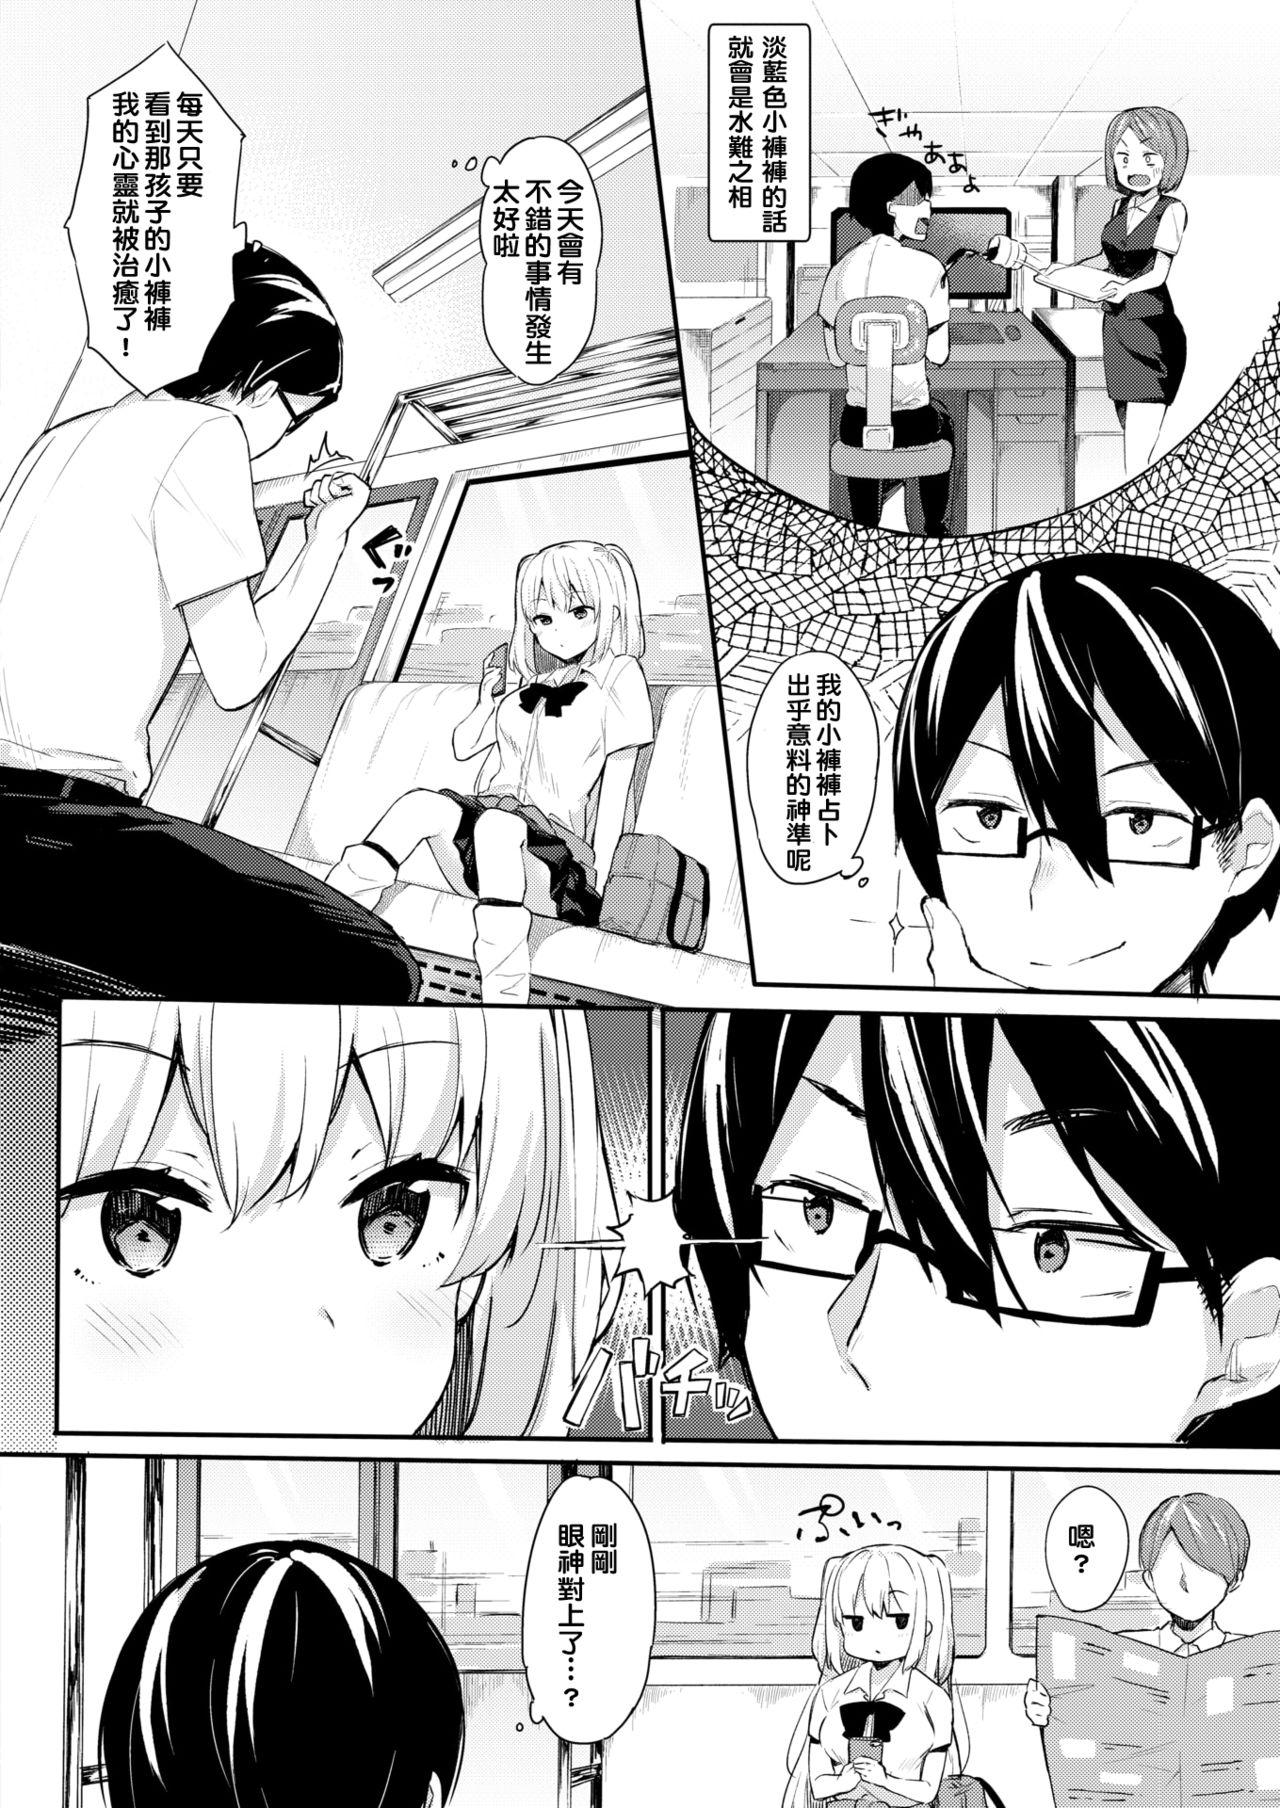 Her Kyou no Opants Uranai Clothed Sex - Page 2